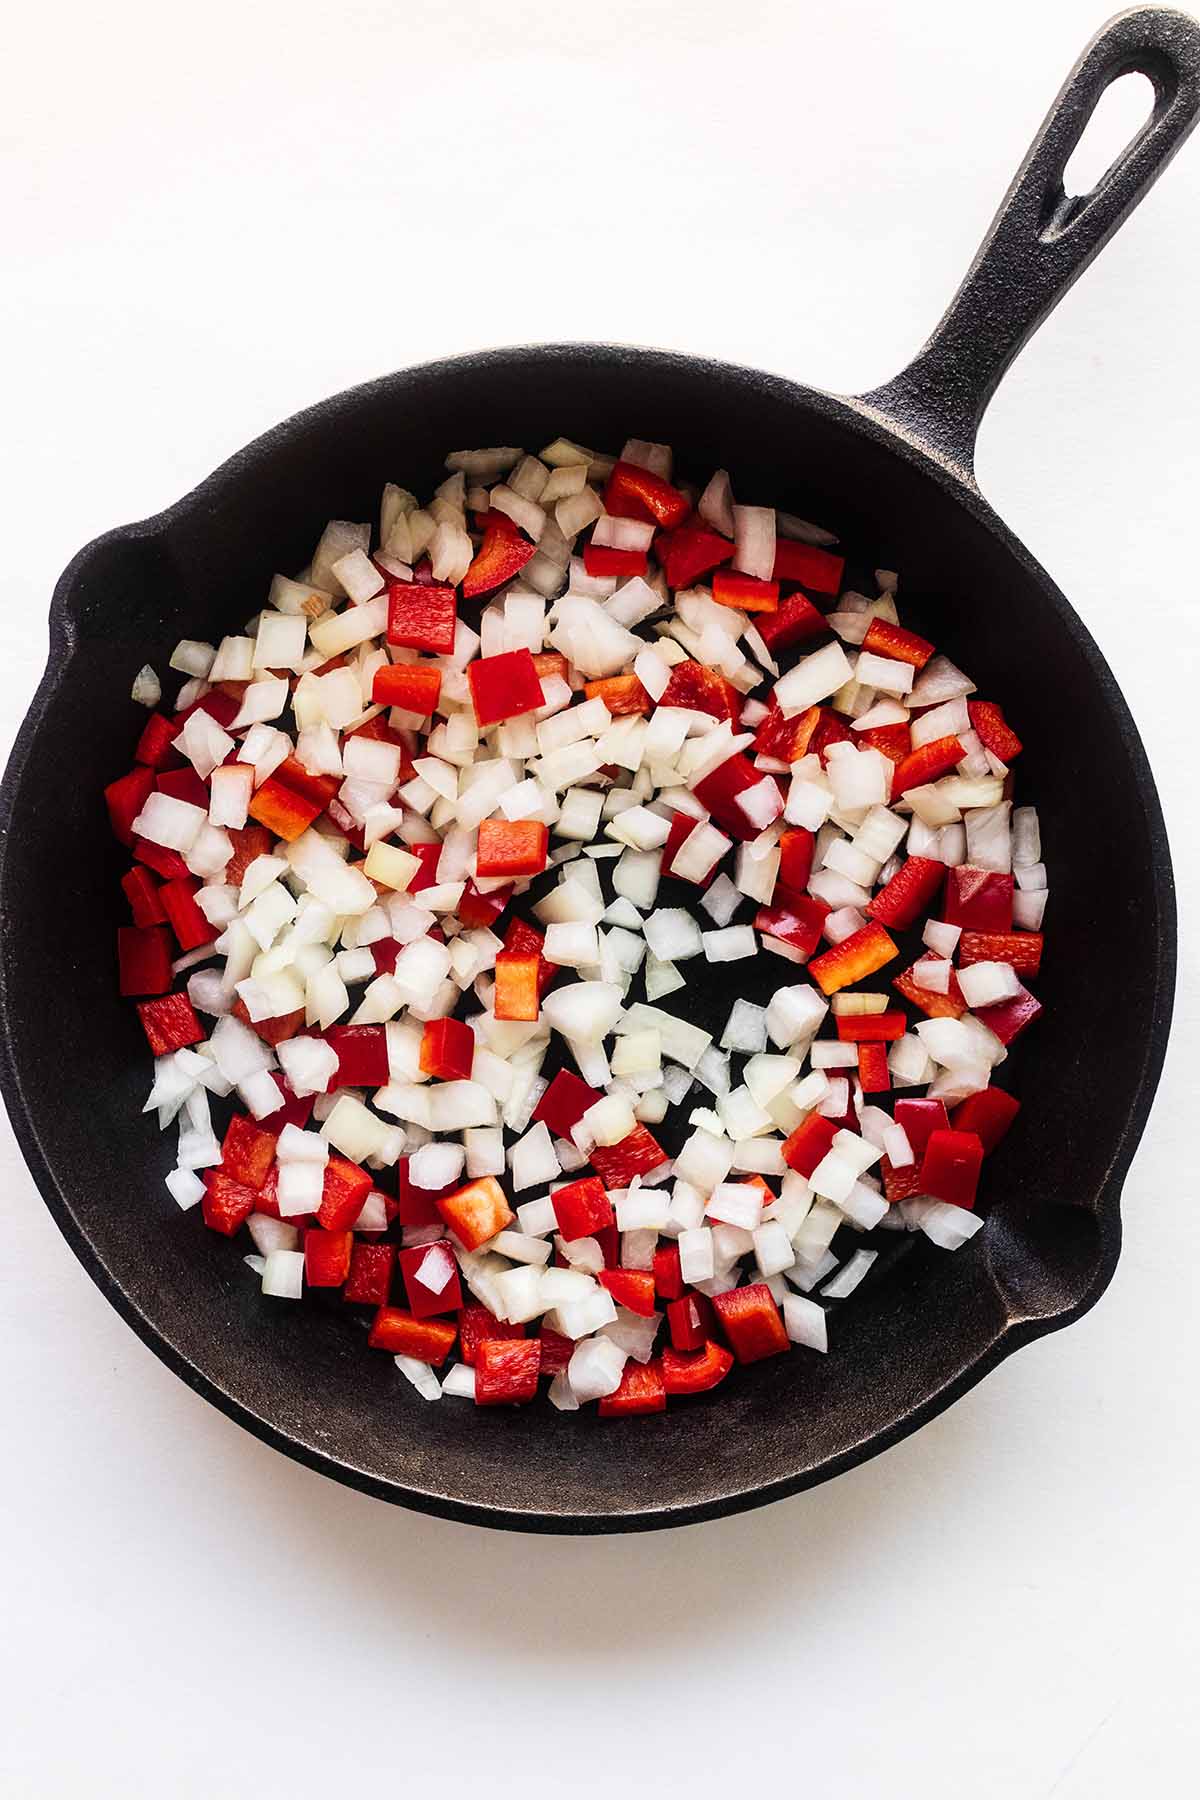 Chopped onion and red bell pepper in a cast iron skillet.